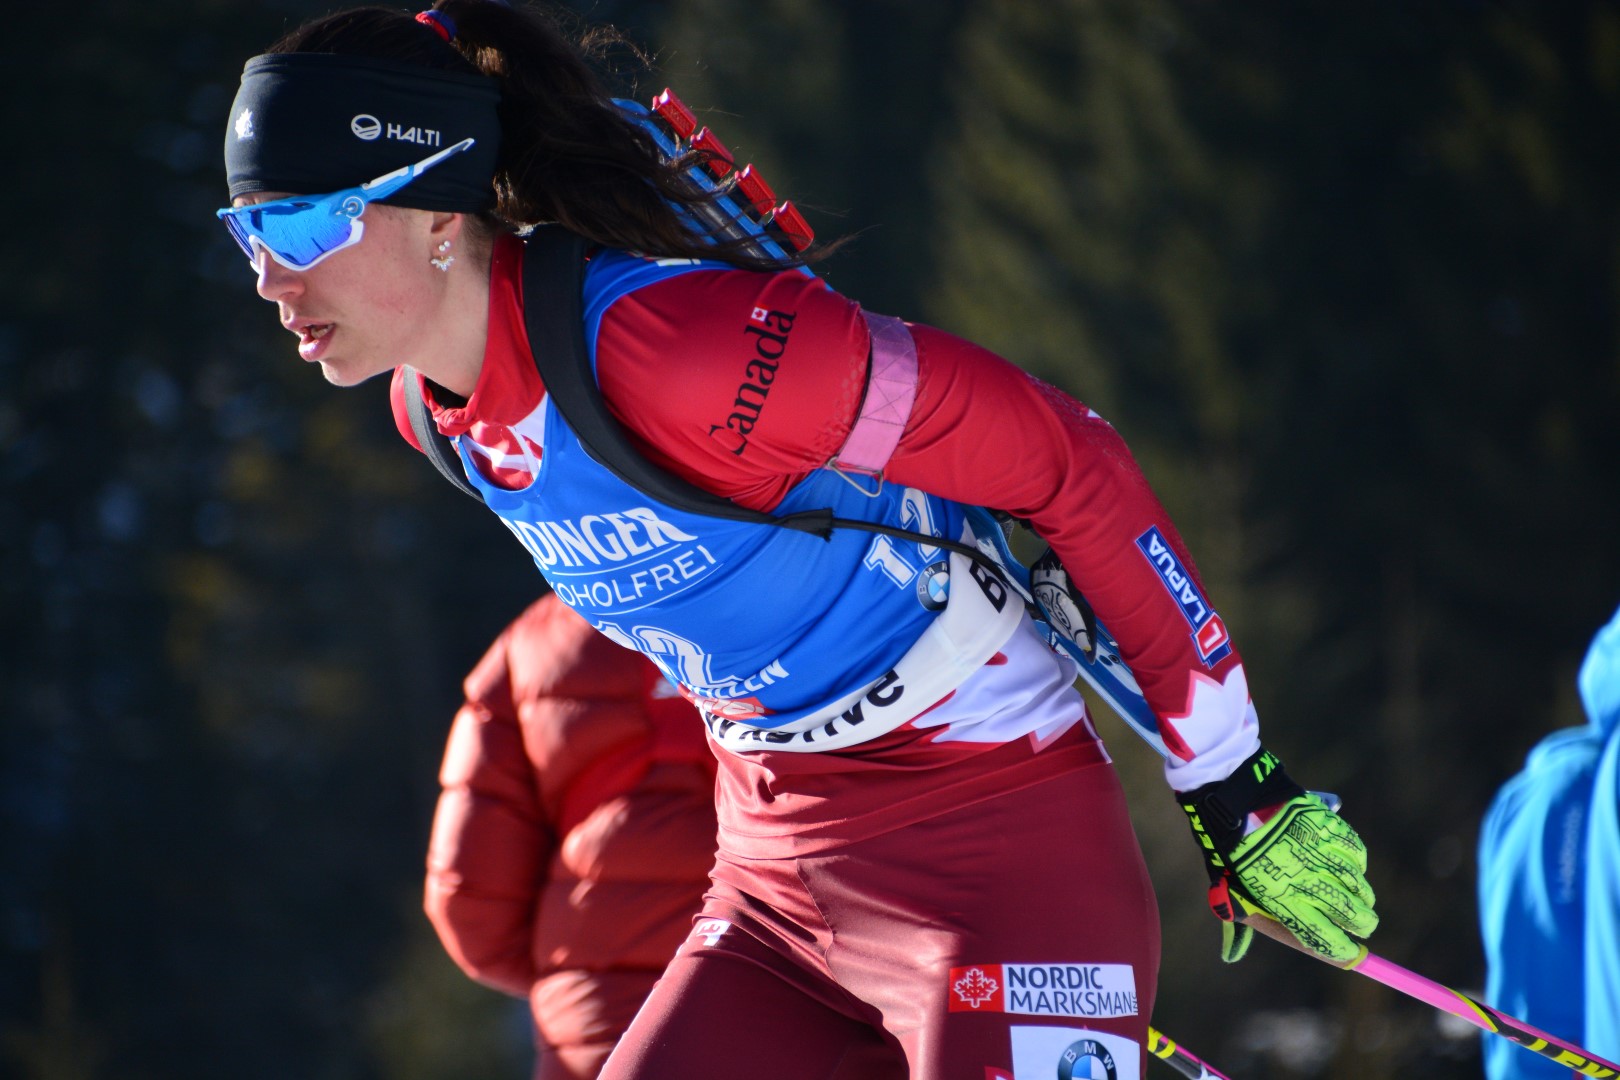 This Week in Canmore: Biathlon World Cup Season Finale